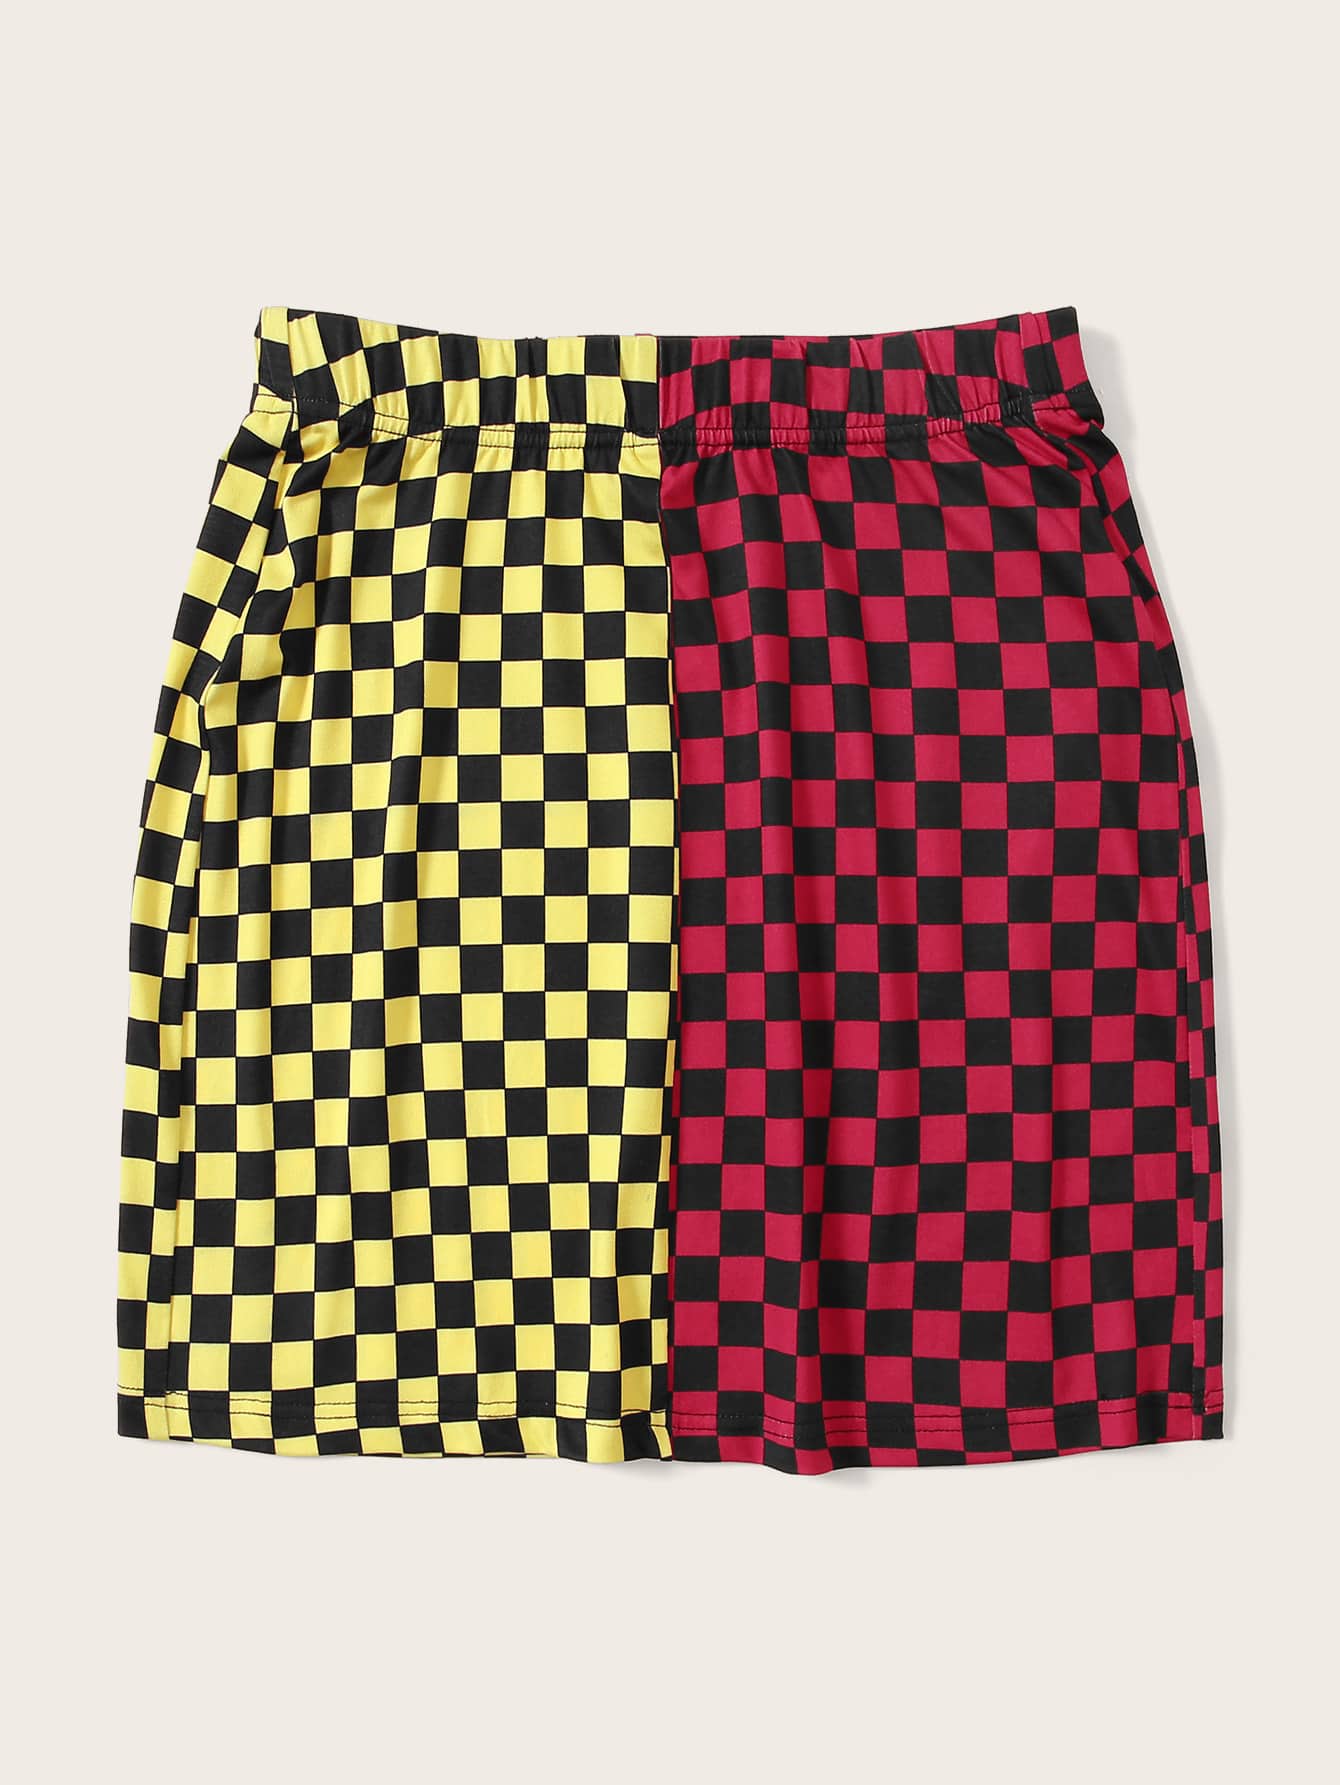 This Or That Checkered Skirt